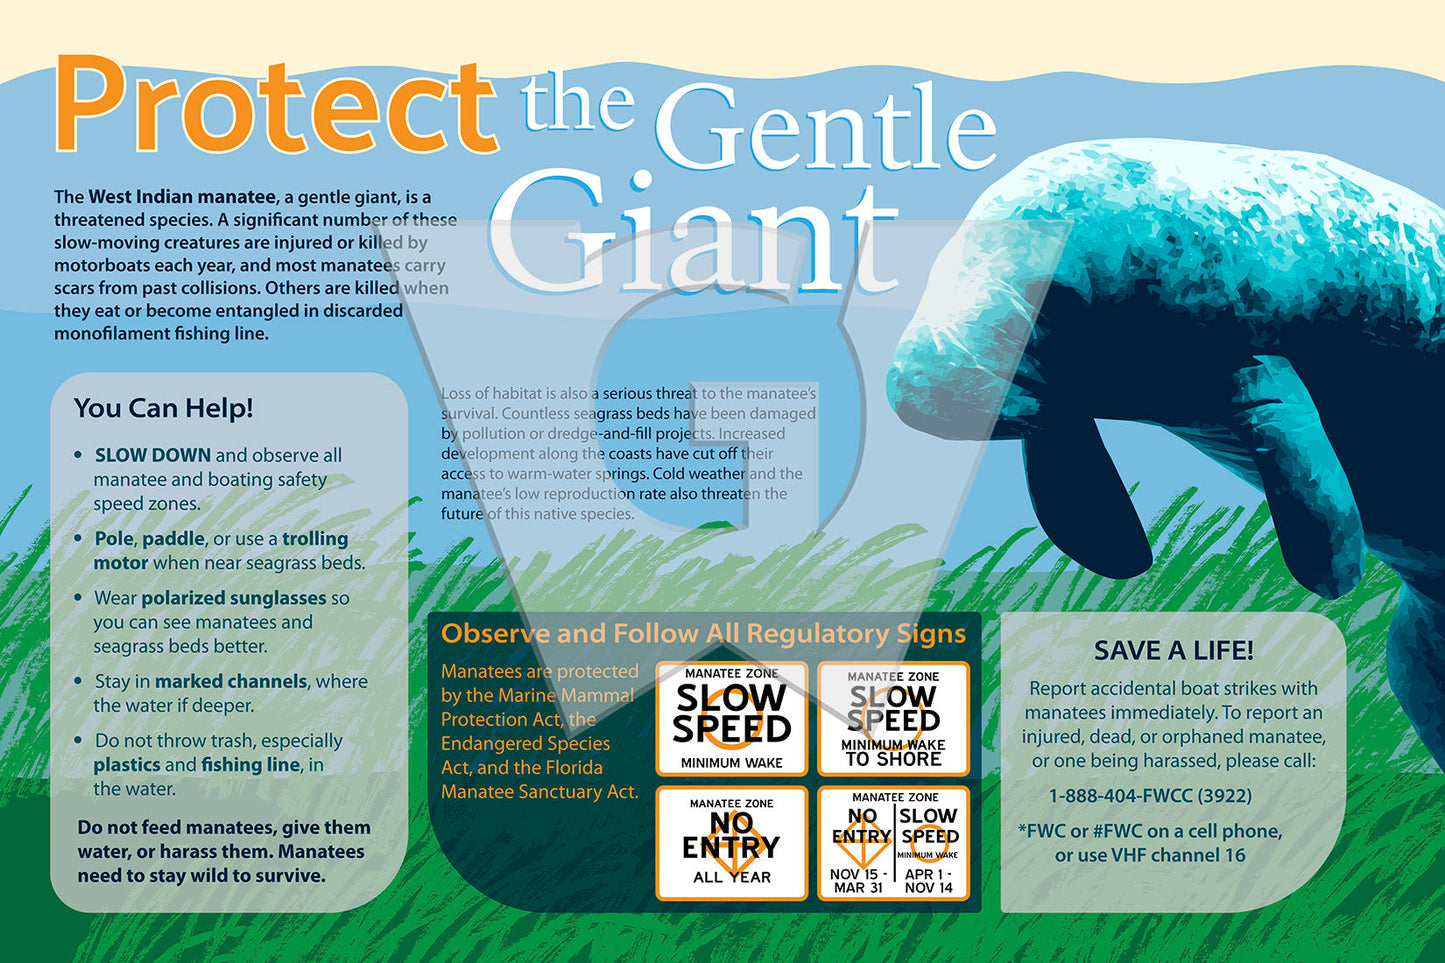 Protect the Gentle Giant